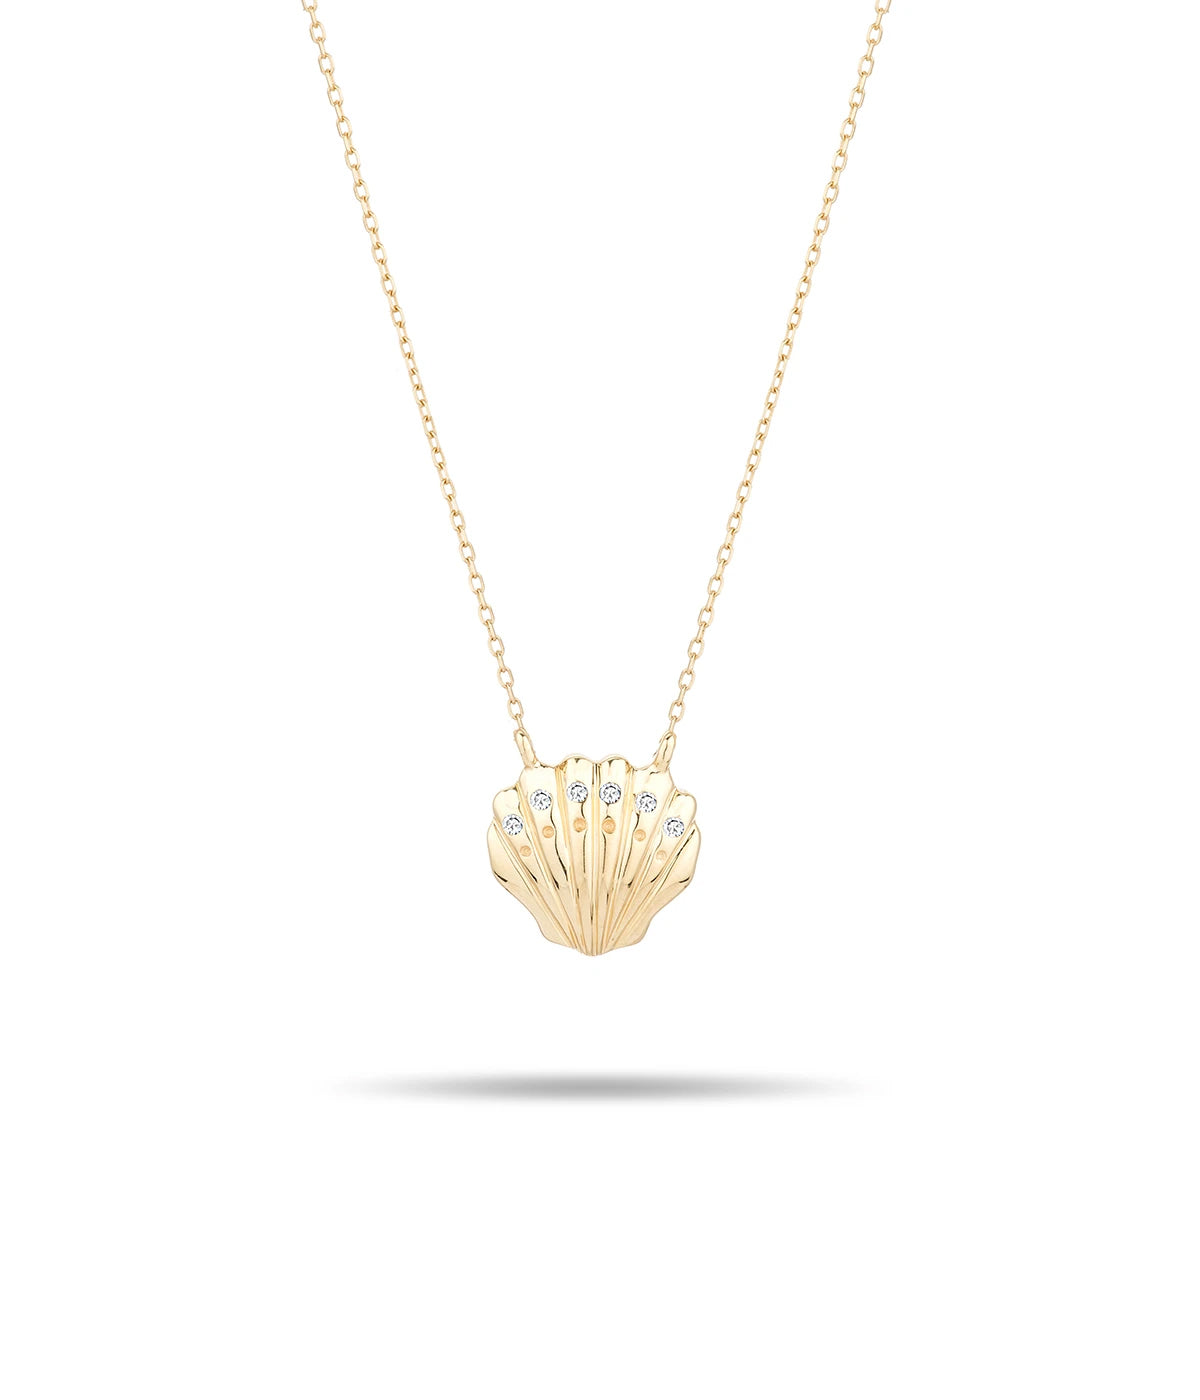 Sea Creatures Clamshell Necklace in 14K Yellow Gold